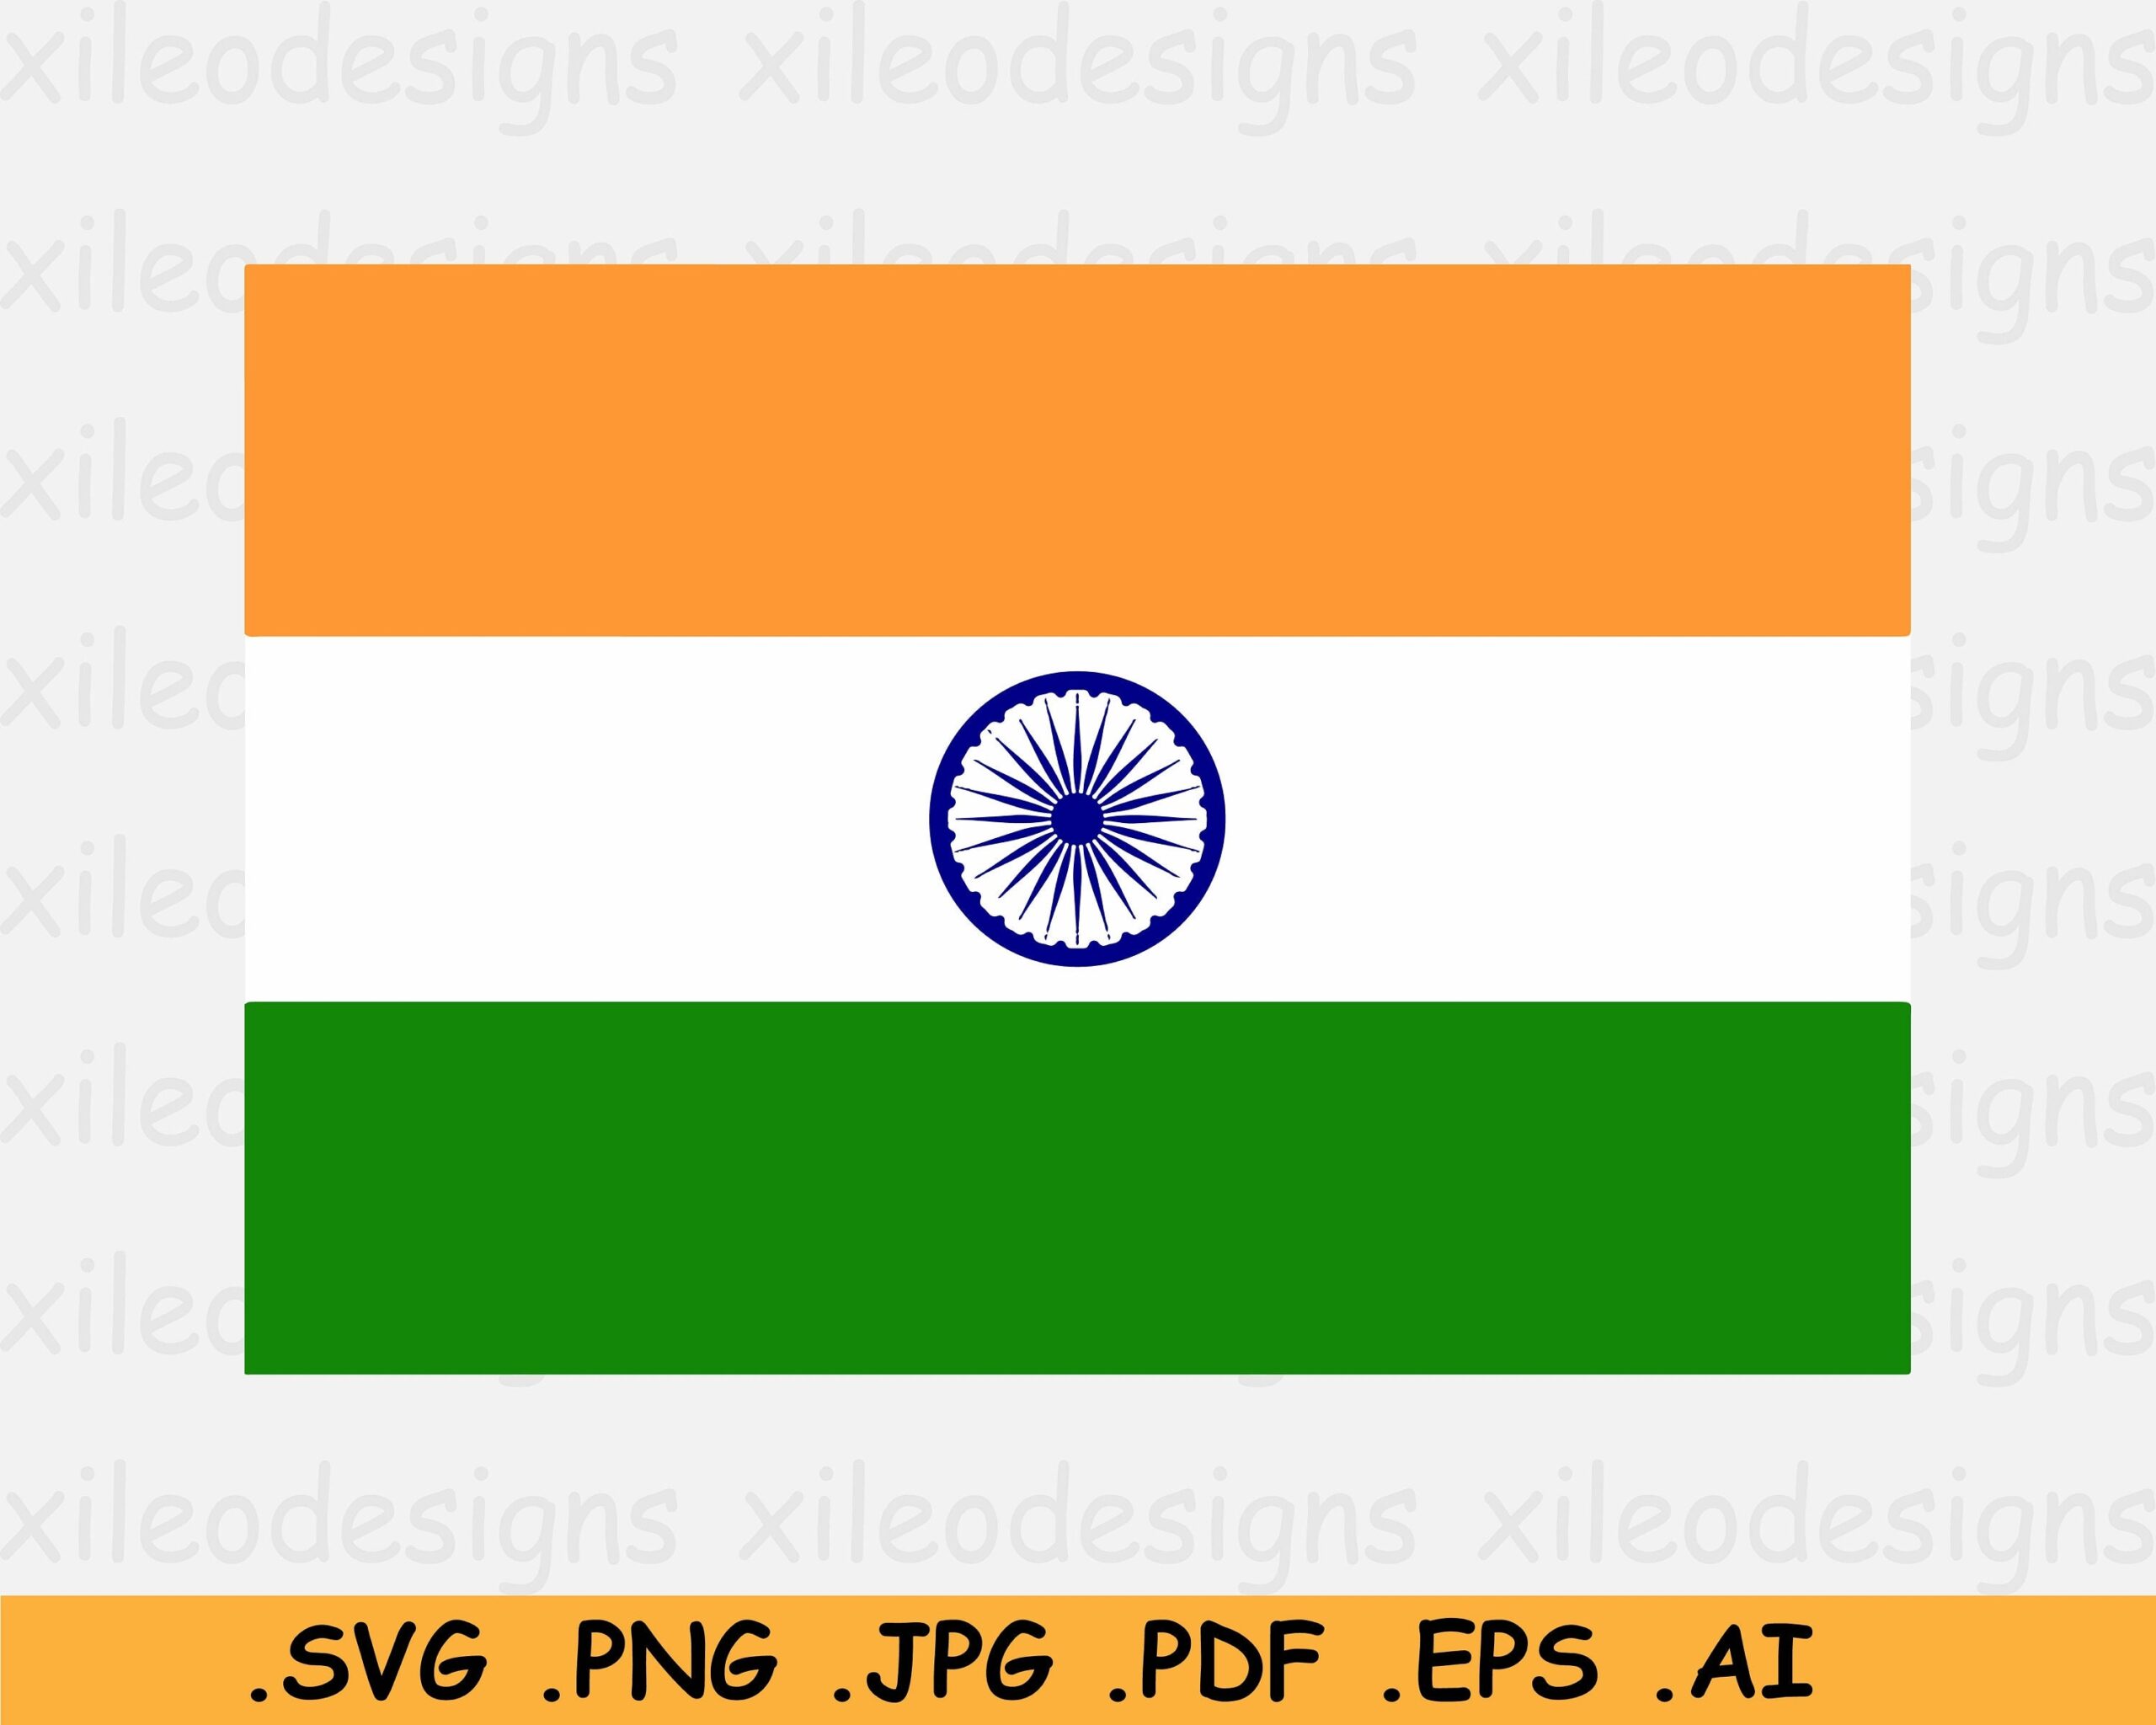 India Flag SVG Indian National Nation Country Banner Cricut Cut File Digital Download Clipart Vector Graphic Icon Eps Ai Png Jpg Pdf Etsy